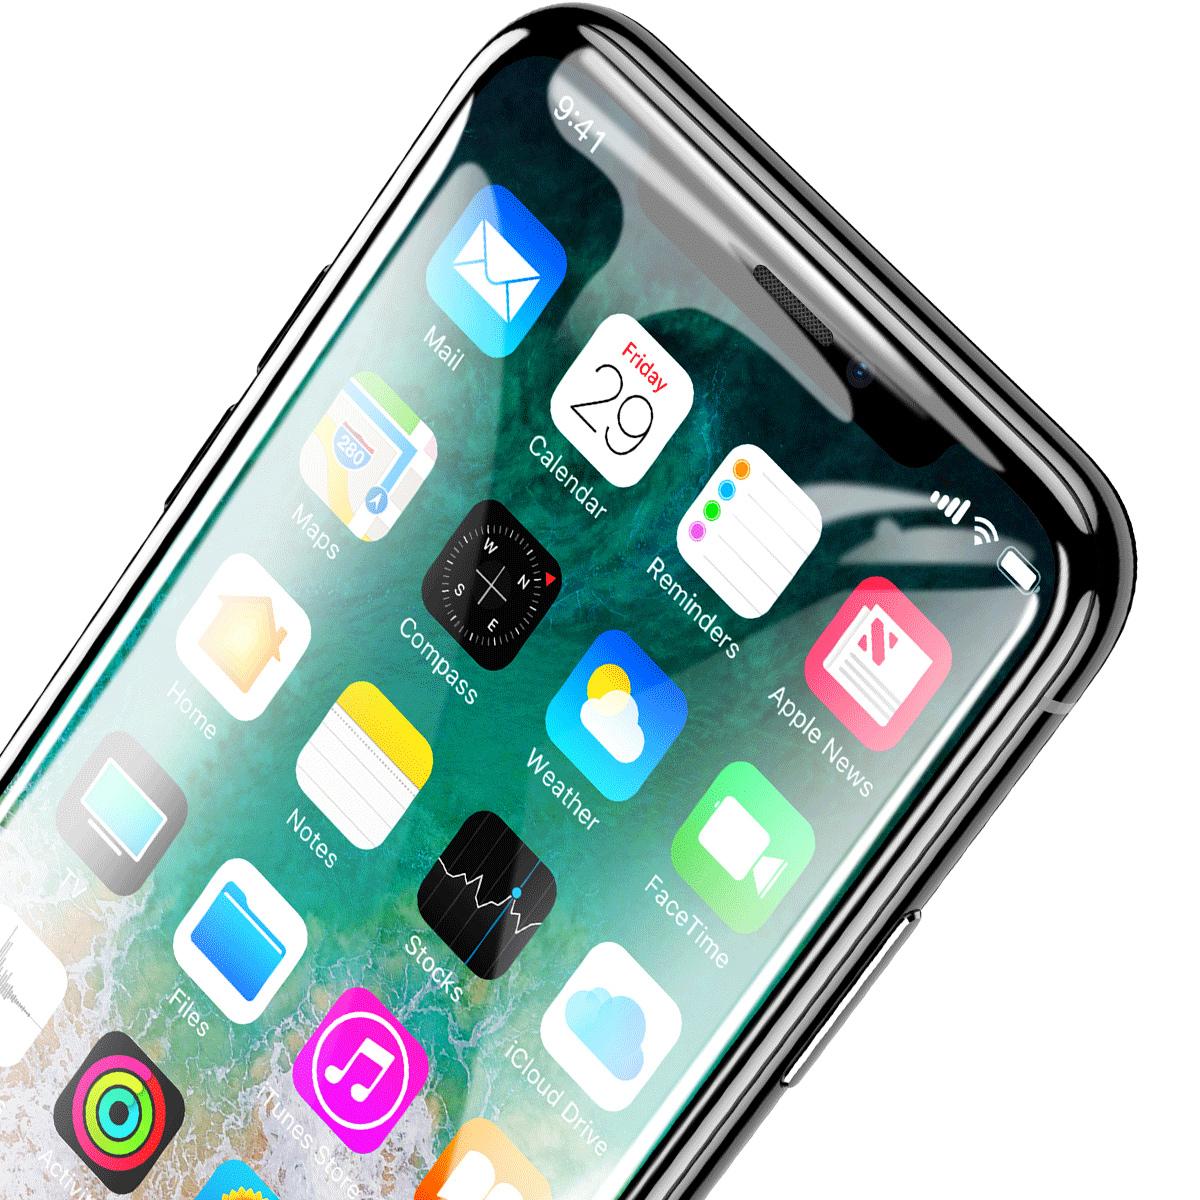 Baseus iPhone X XS 5.8 inch 0.3mm All-screen Tempered Glass Screen Protector Glass Film Black